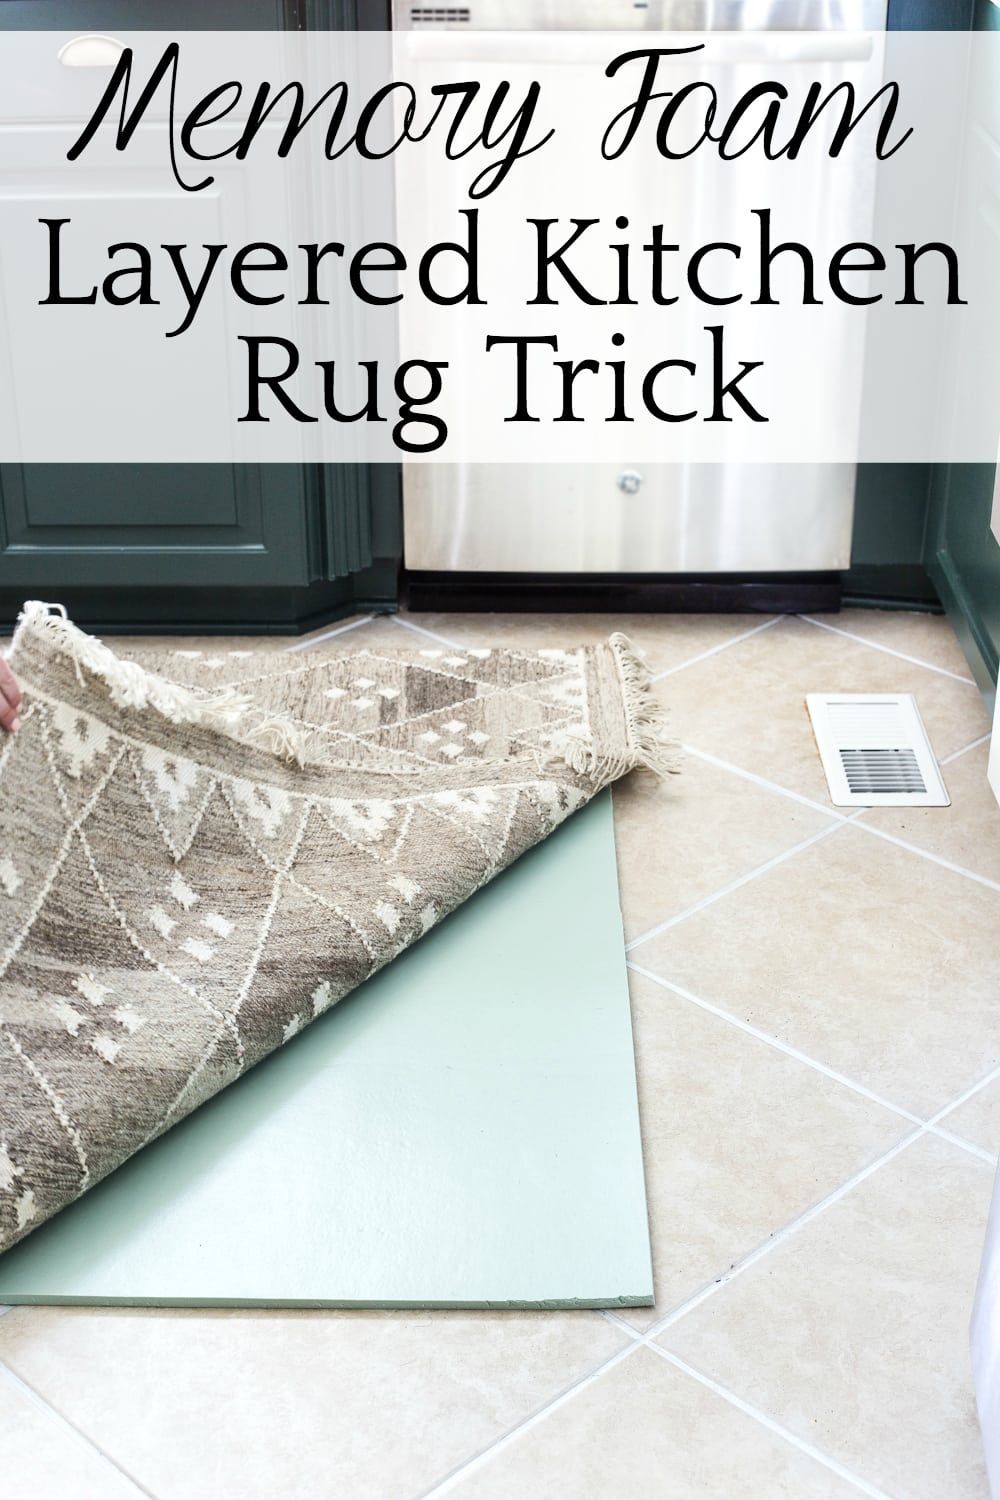 Memory Foam Layered Kitchen Rug and Tile Grout Refresh - Bless'er House